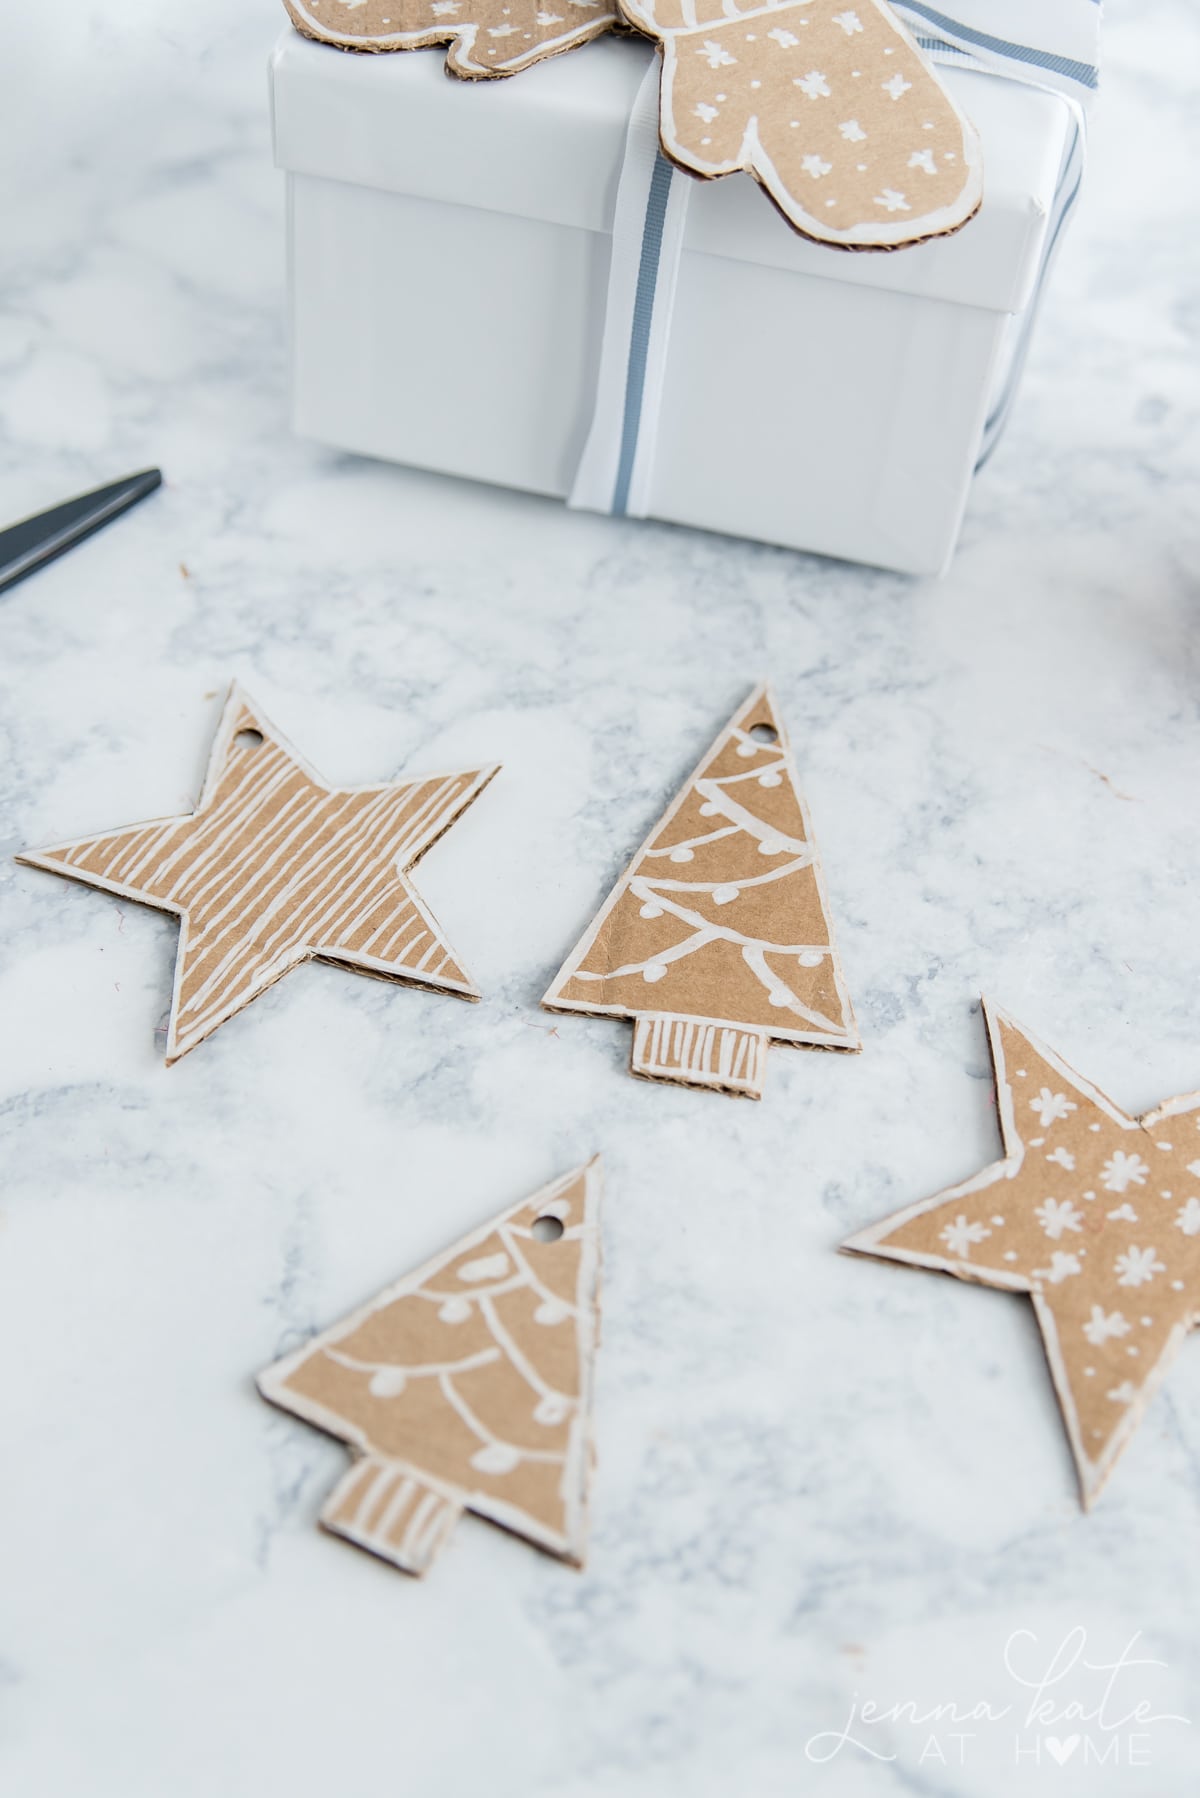 Christmas tree and star cut outs from cardboard for gift tags